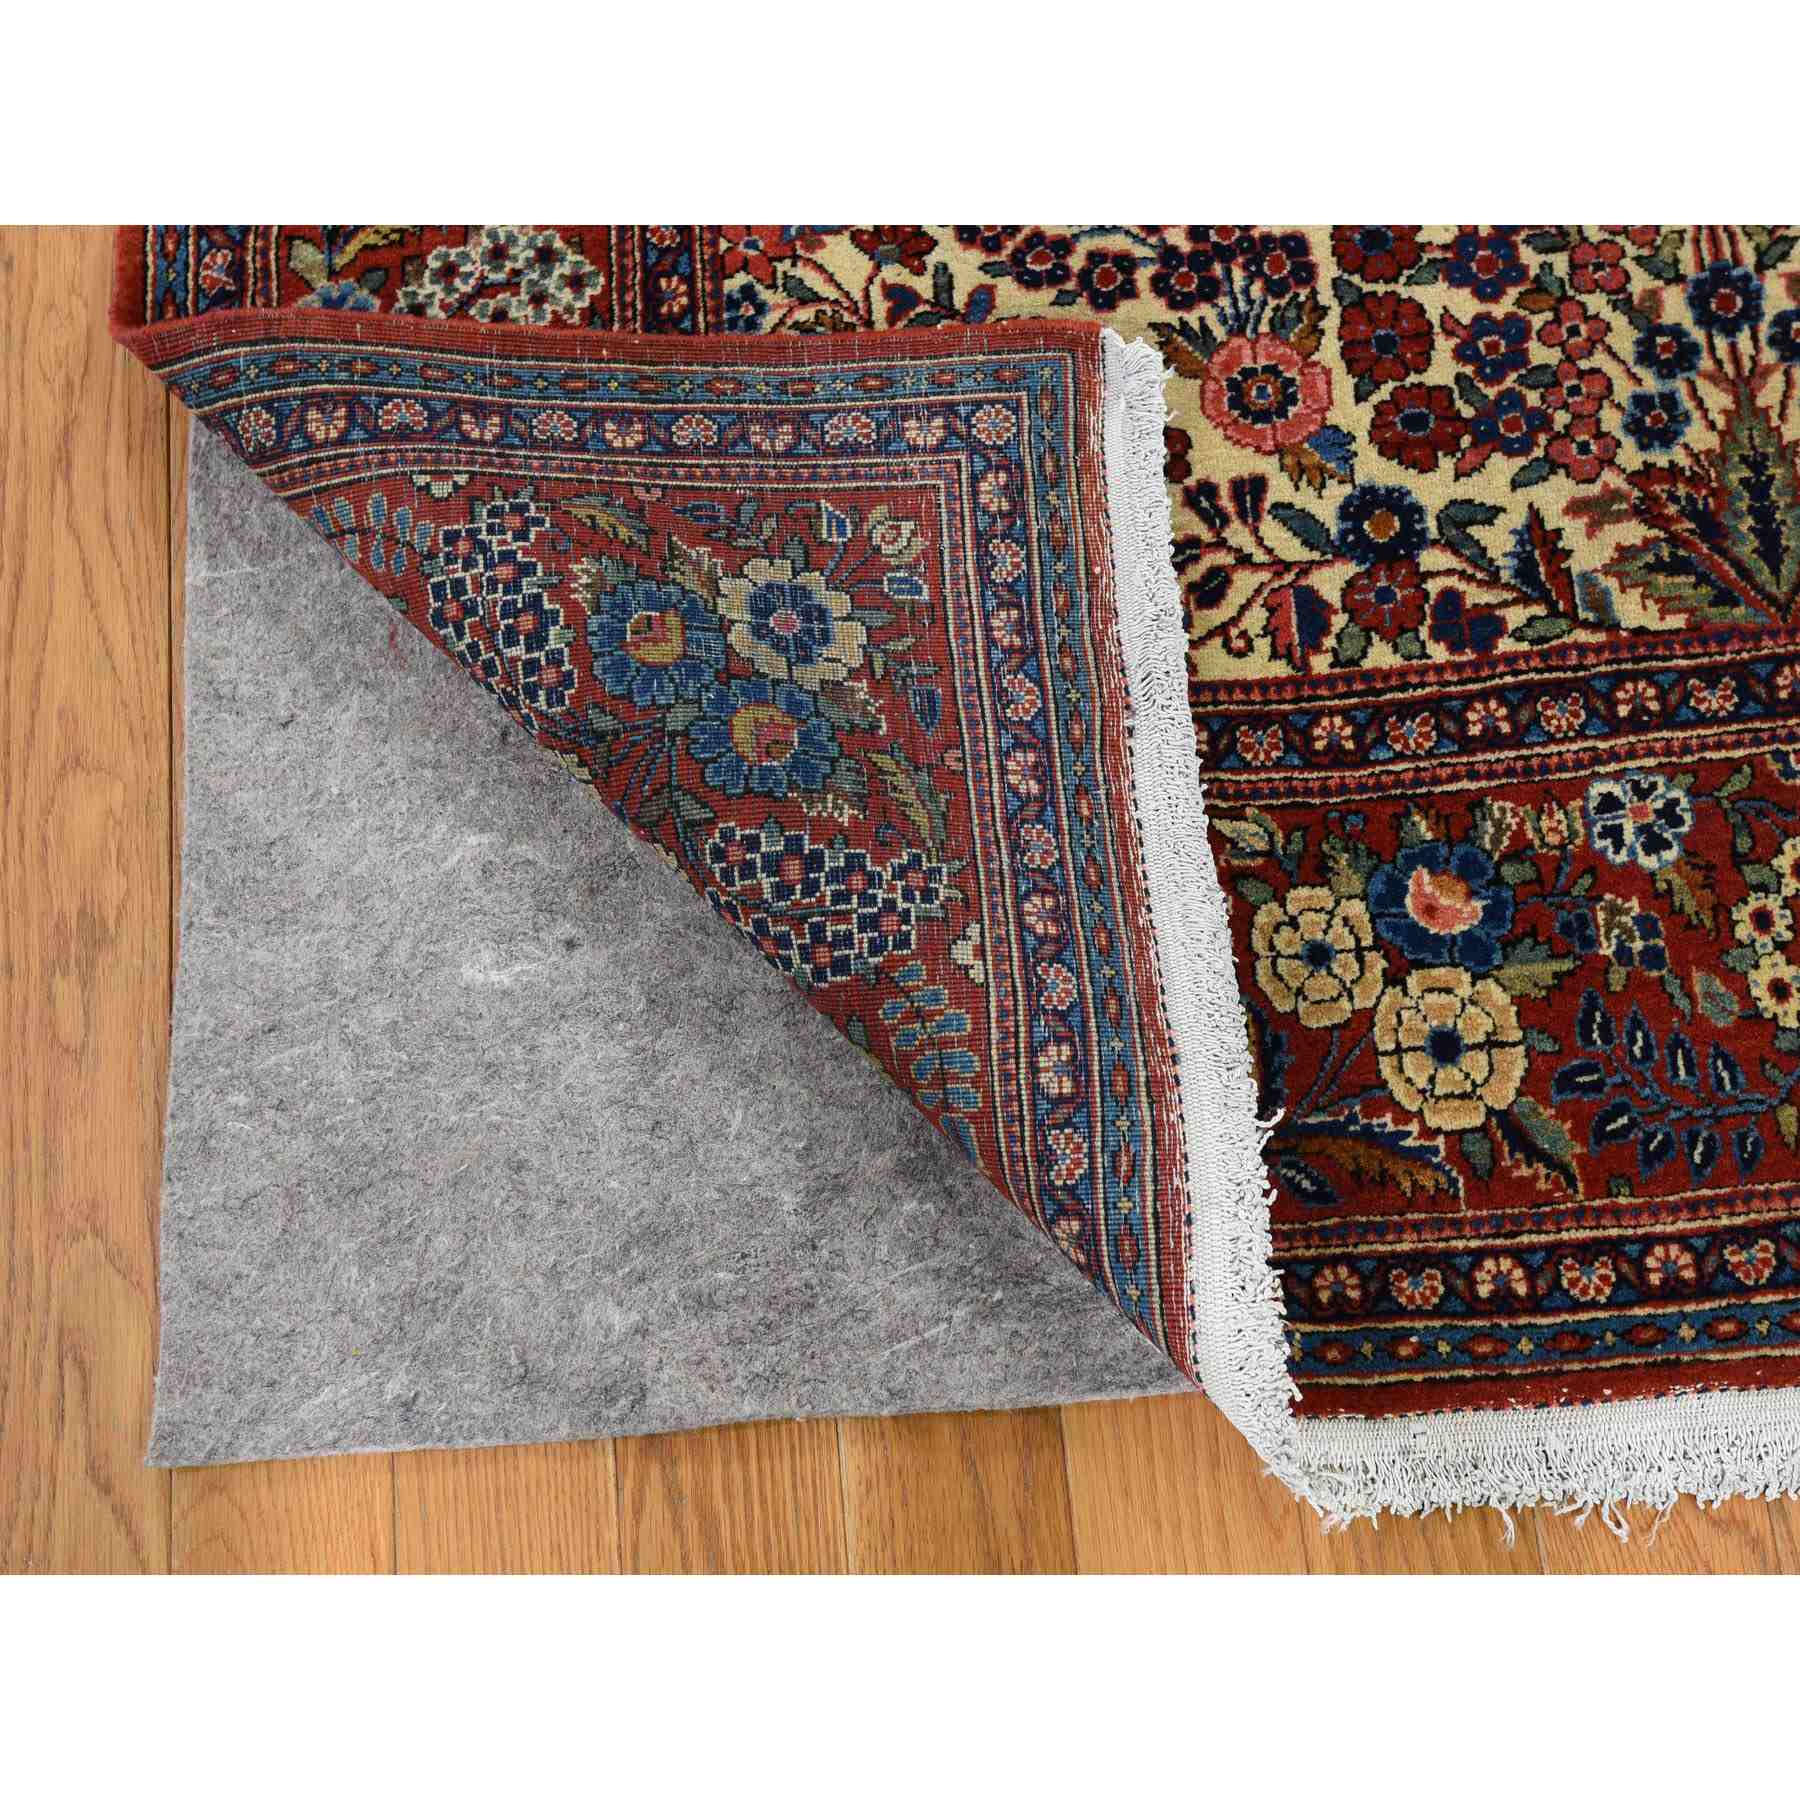 Antique-Hand-Knotted-Rug-243490